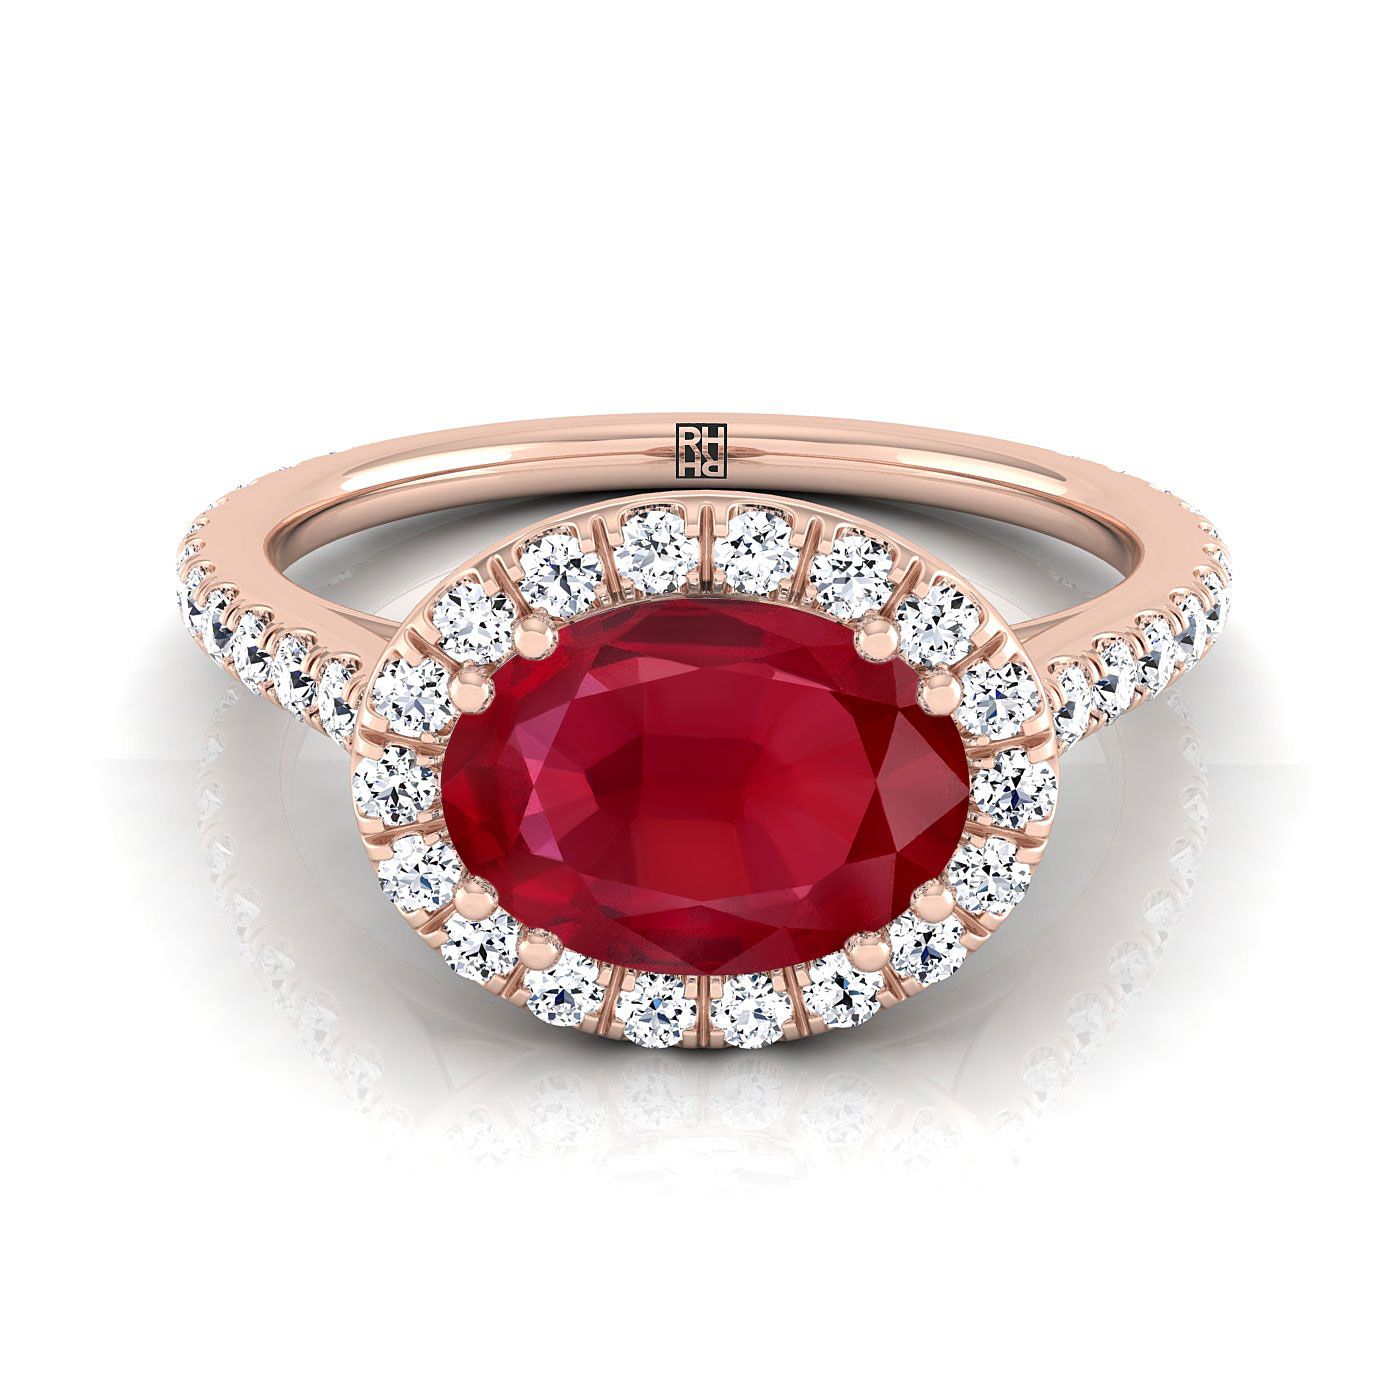 14K Rose Gold Oval Ruby Horizontal Fancy East West Diamond Halo Engagement Ring -1/2ctw